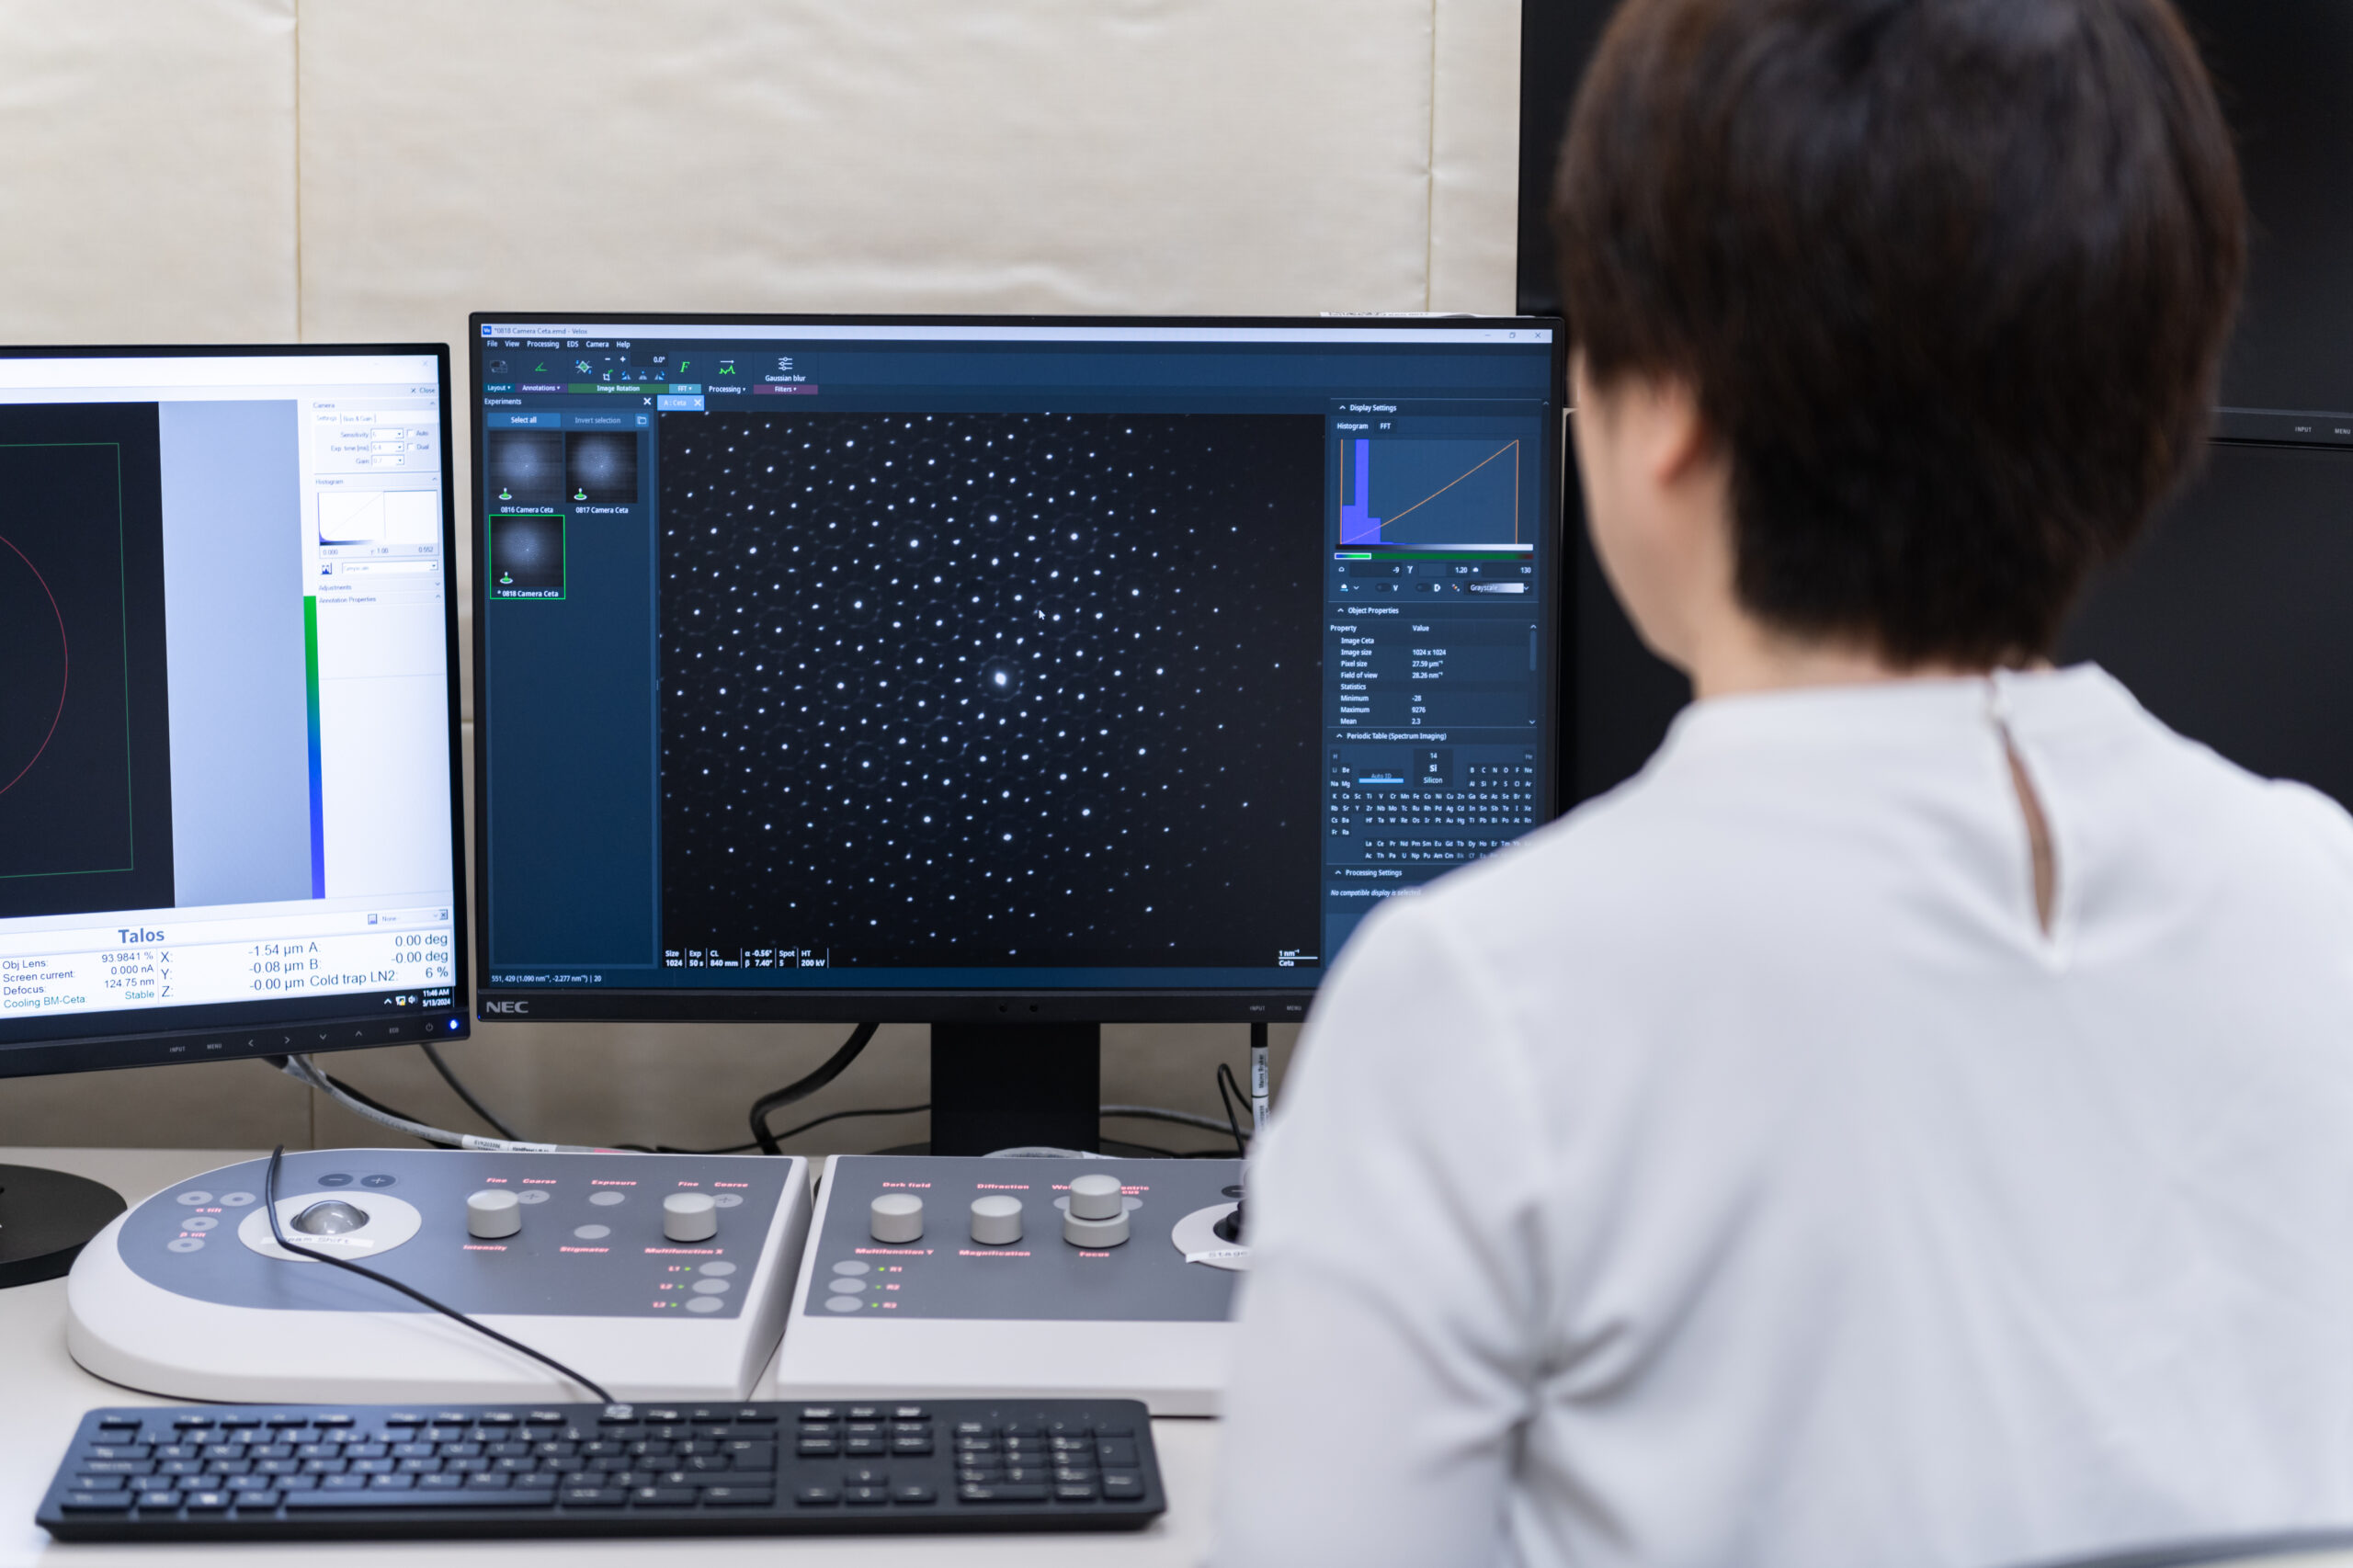 Diffraction pattern of quasicrystal shown on a display